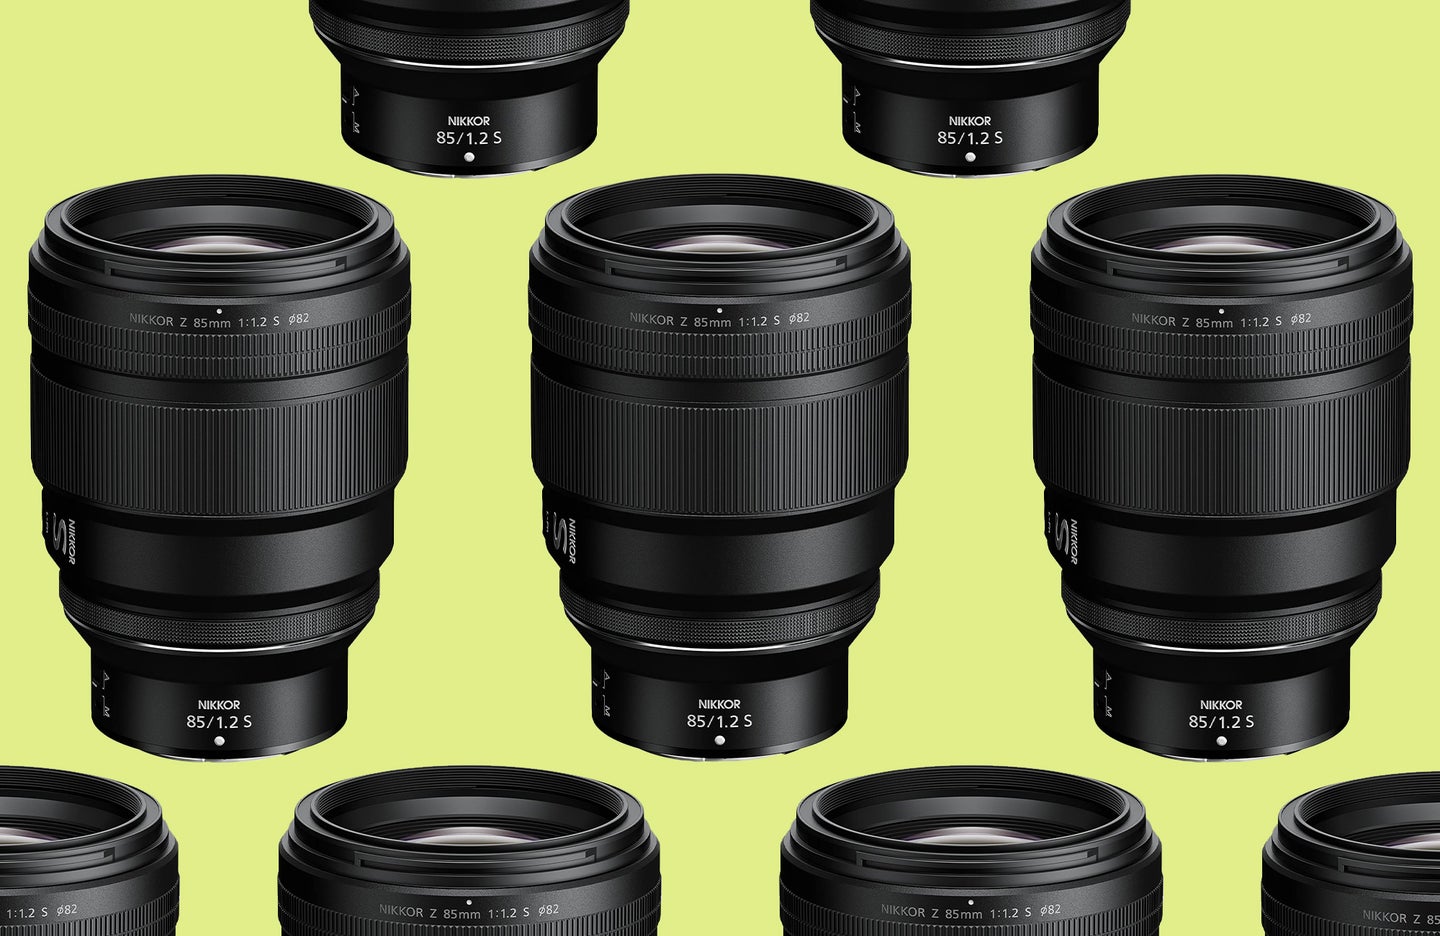 The Nikon 85mm f/1.2 S repeated 9 times against a light green background